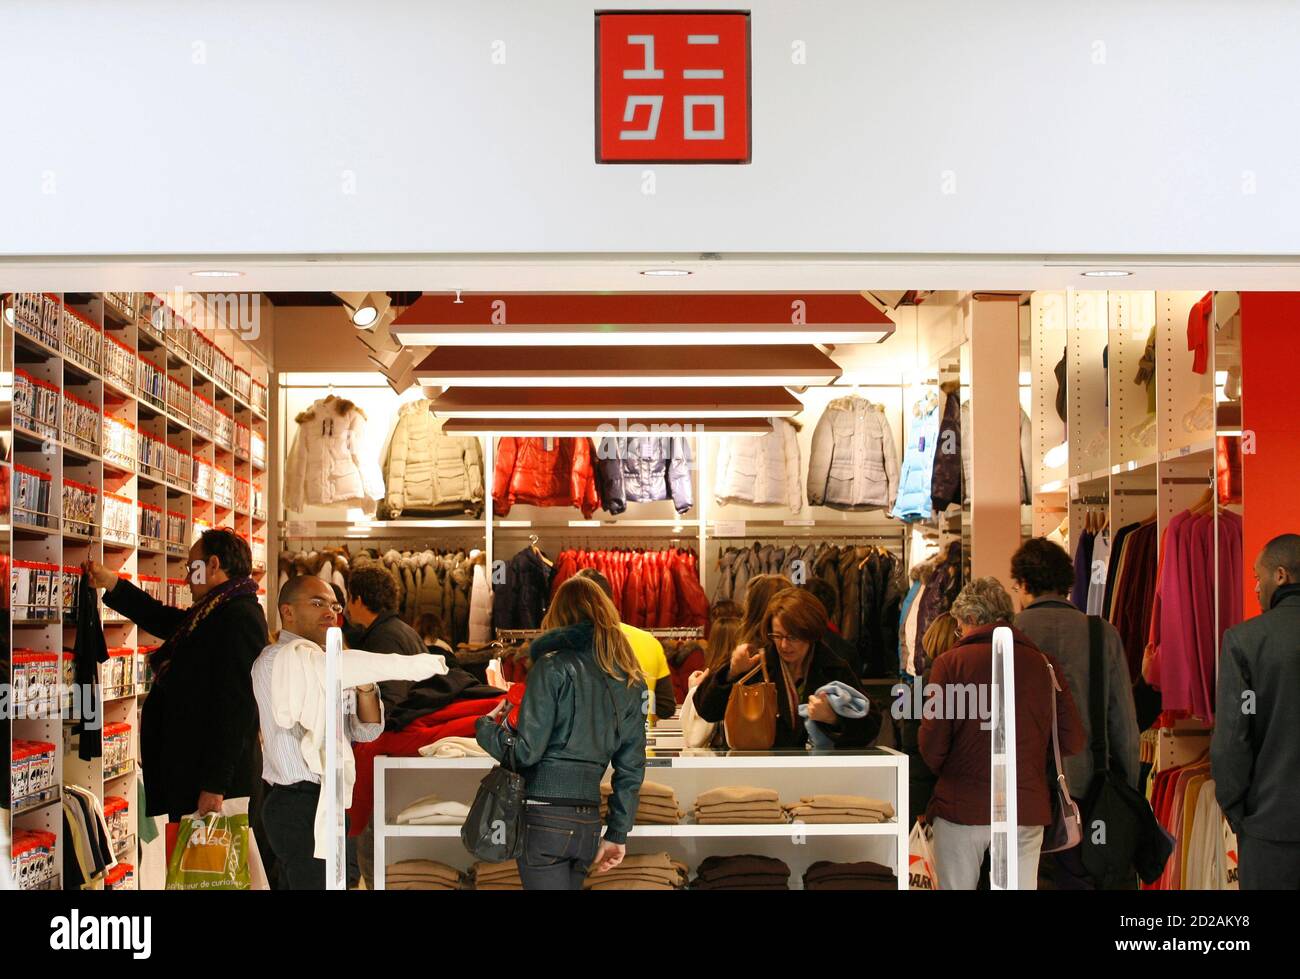 Customers look at clothes inside the casual clothing store Uniqlo operated  by Japanese clothing retailer Fast Retailing Co. in La Defense, near Paris  December 21, 2007. Fast Retailing Co. opened its first